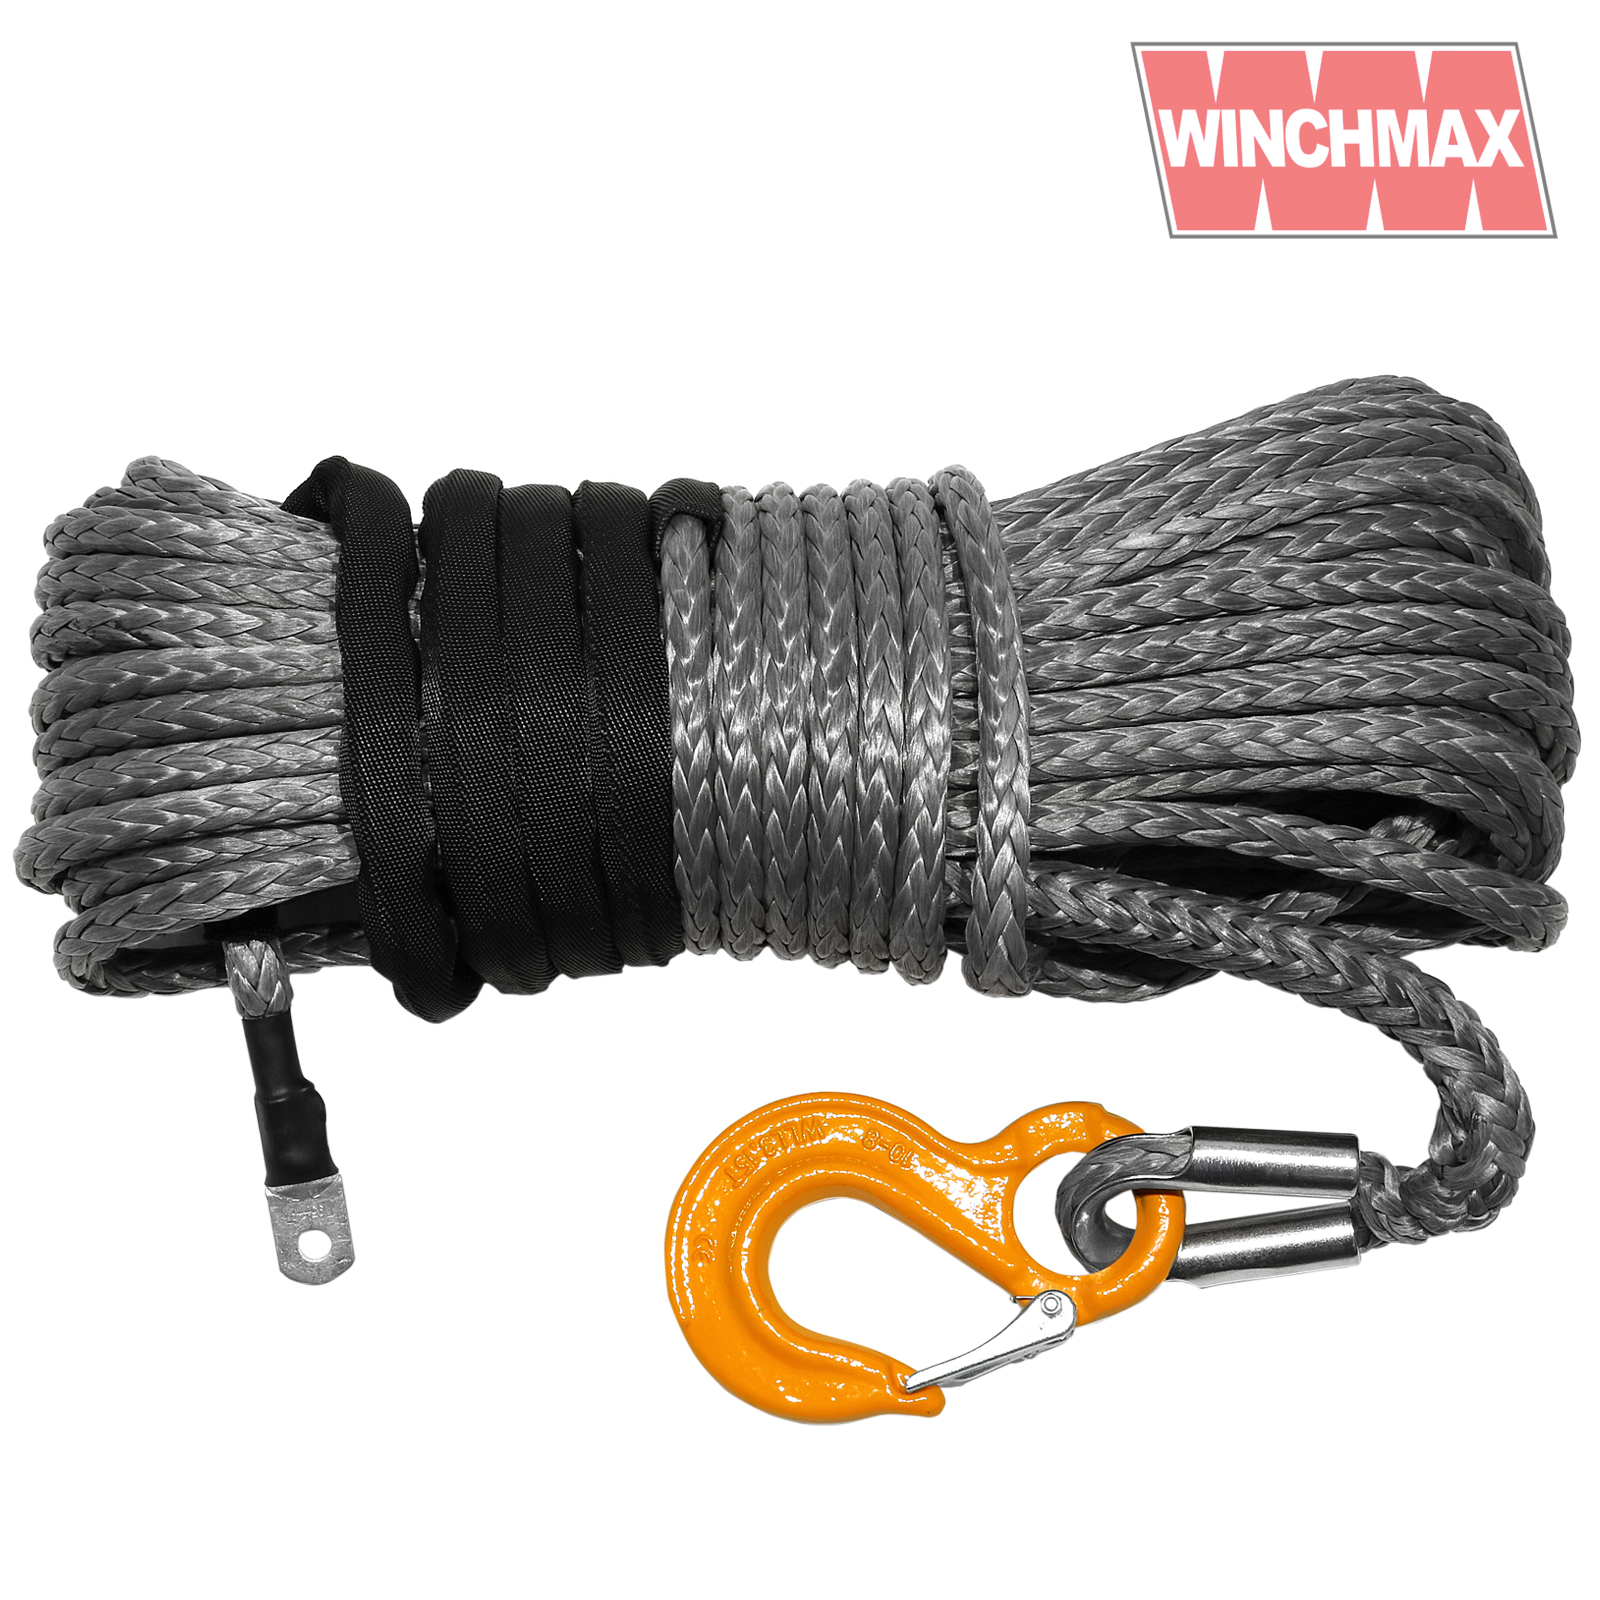 Premium Quality Synthetic Winch Rope 30m x 12mm, Screw Fix. Competition  Hook. - Winchmax